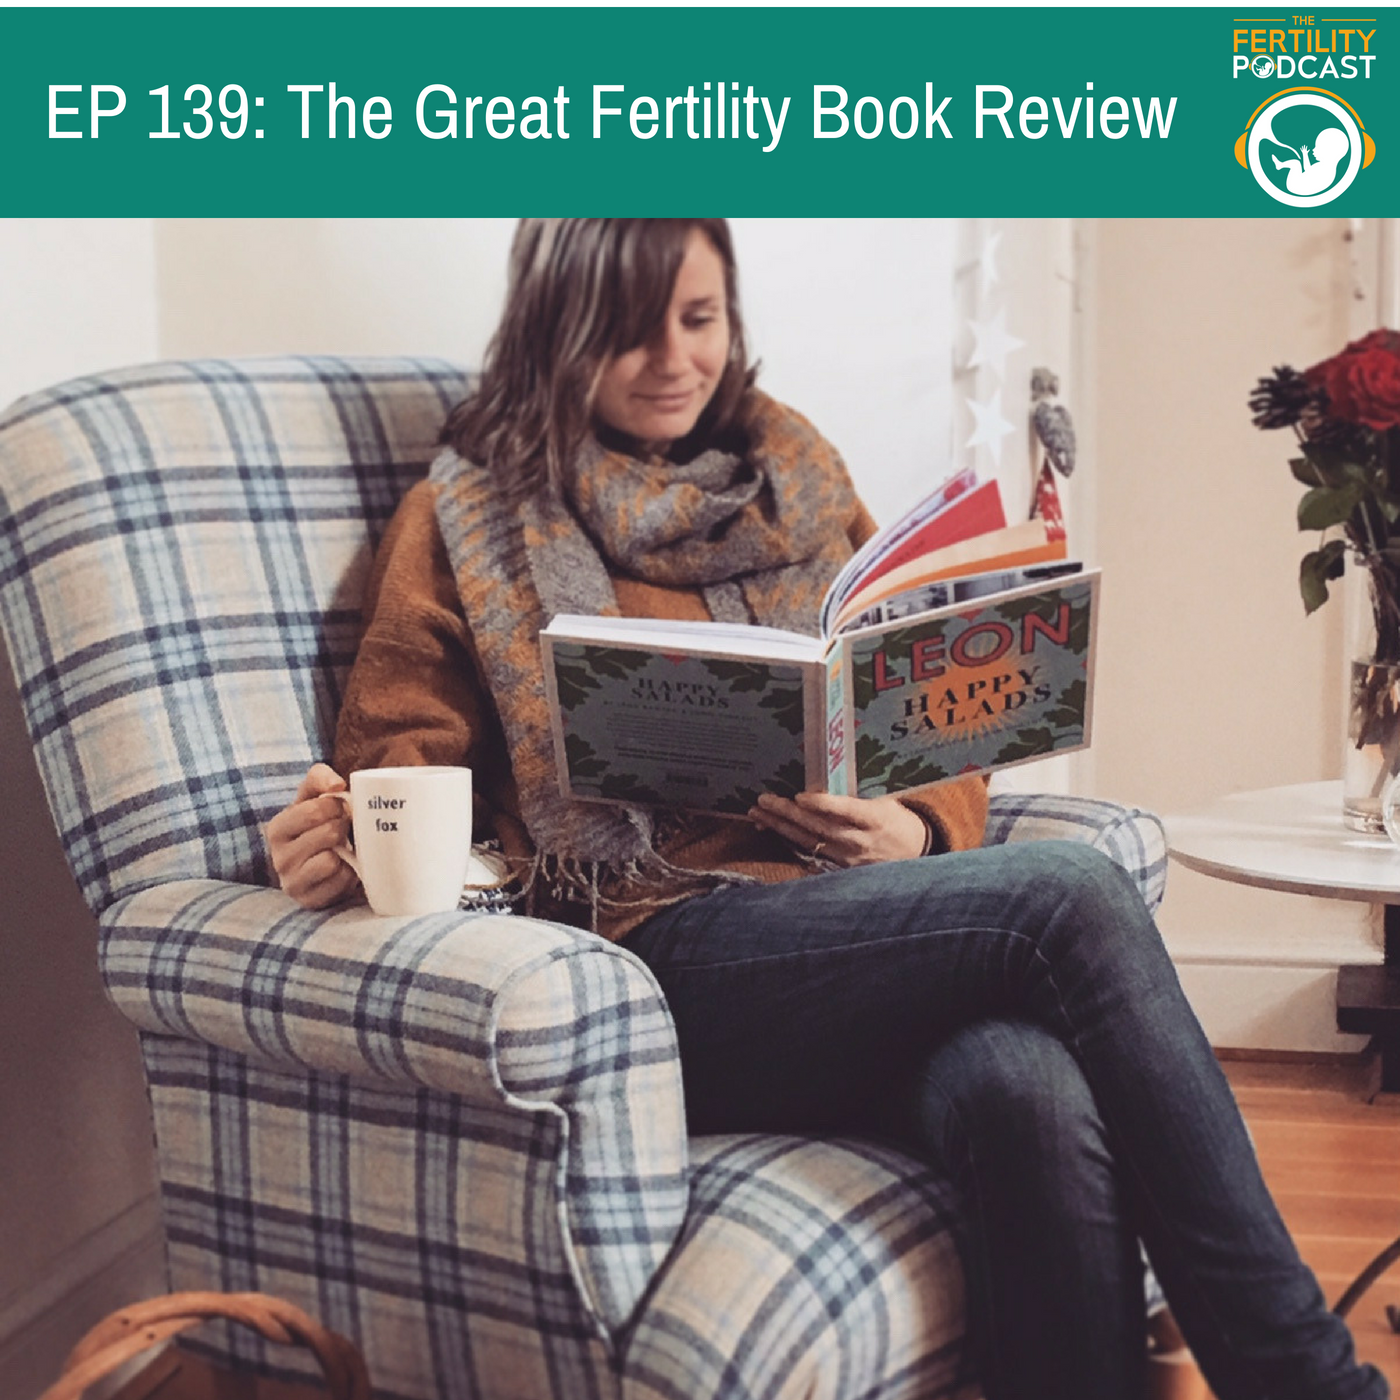 What are the best books to read when trying to conceive?